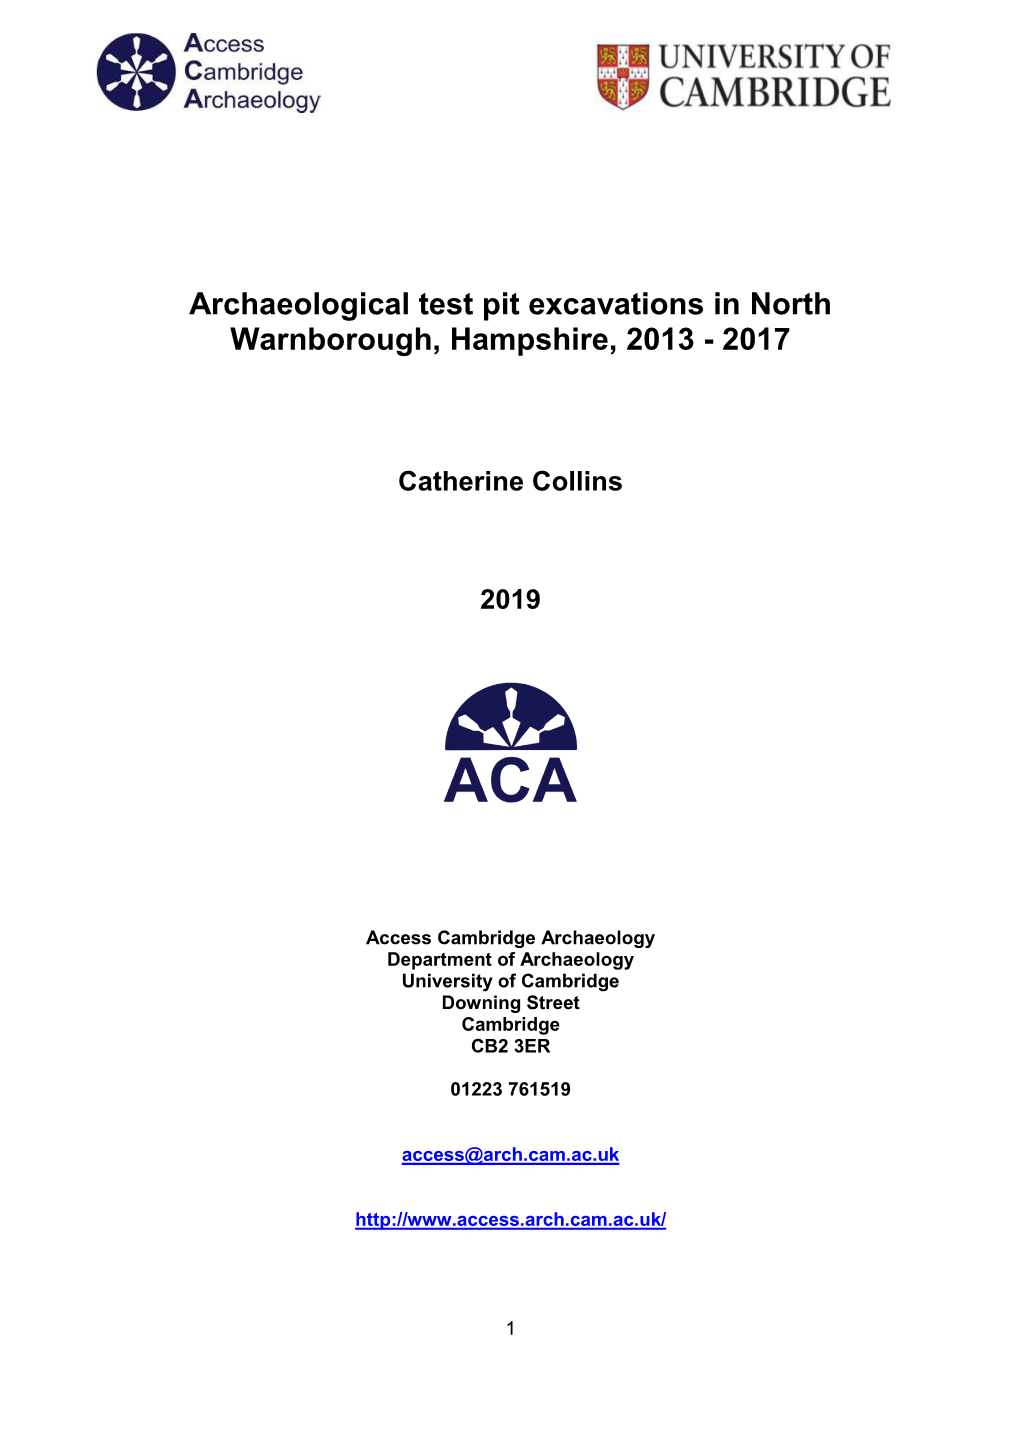 Archaeological Test Pit Excavations in North Warnborough, Hampshire, 2013 - 2017